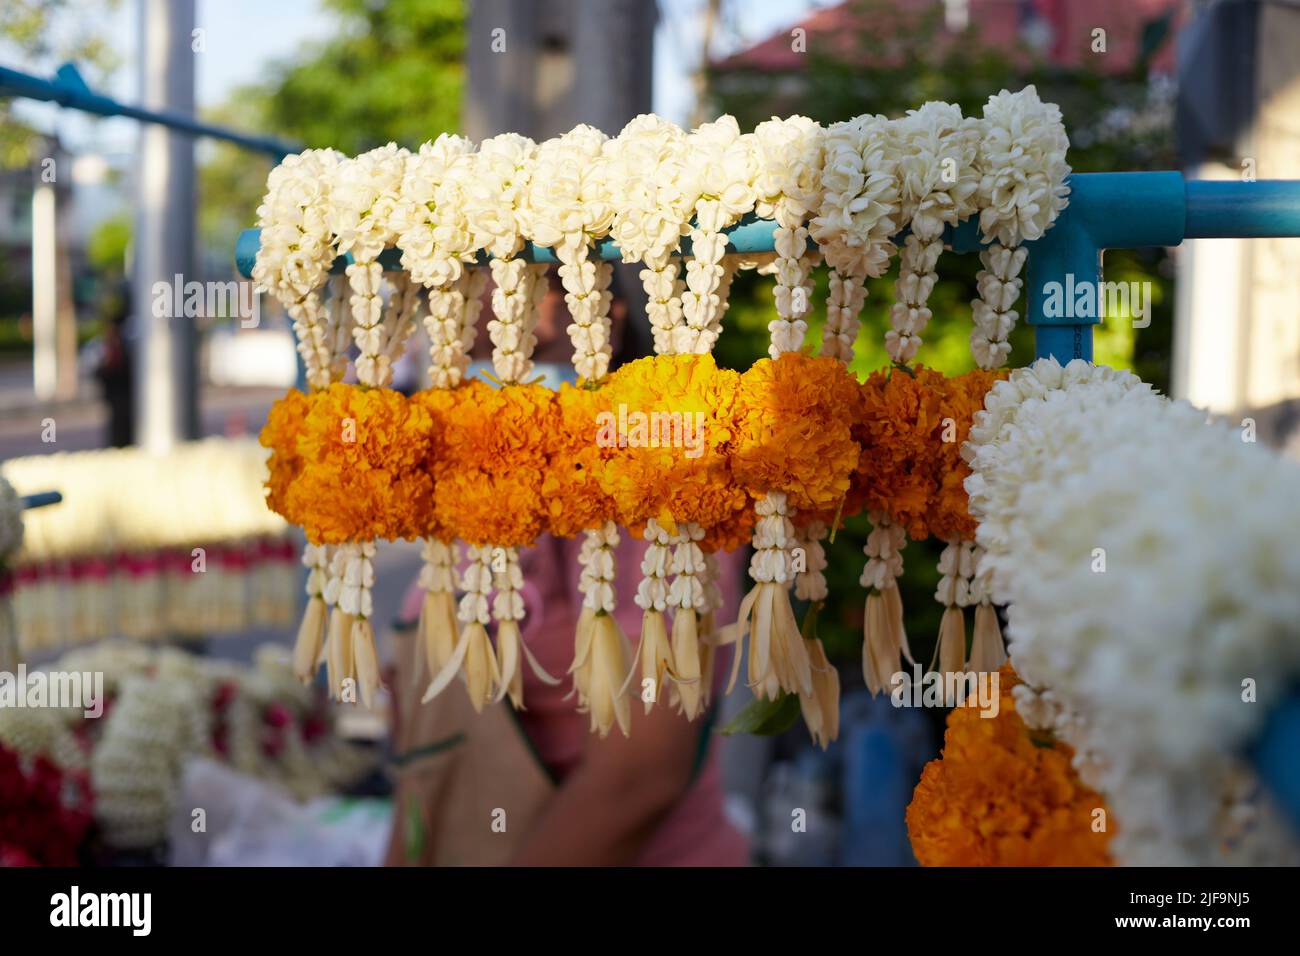 Fresh Jasmine mixed with marigold and crown flower garland hanging for sale at retail Stock Photo